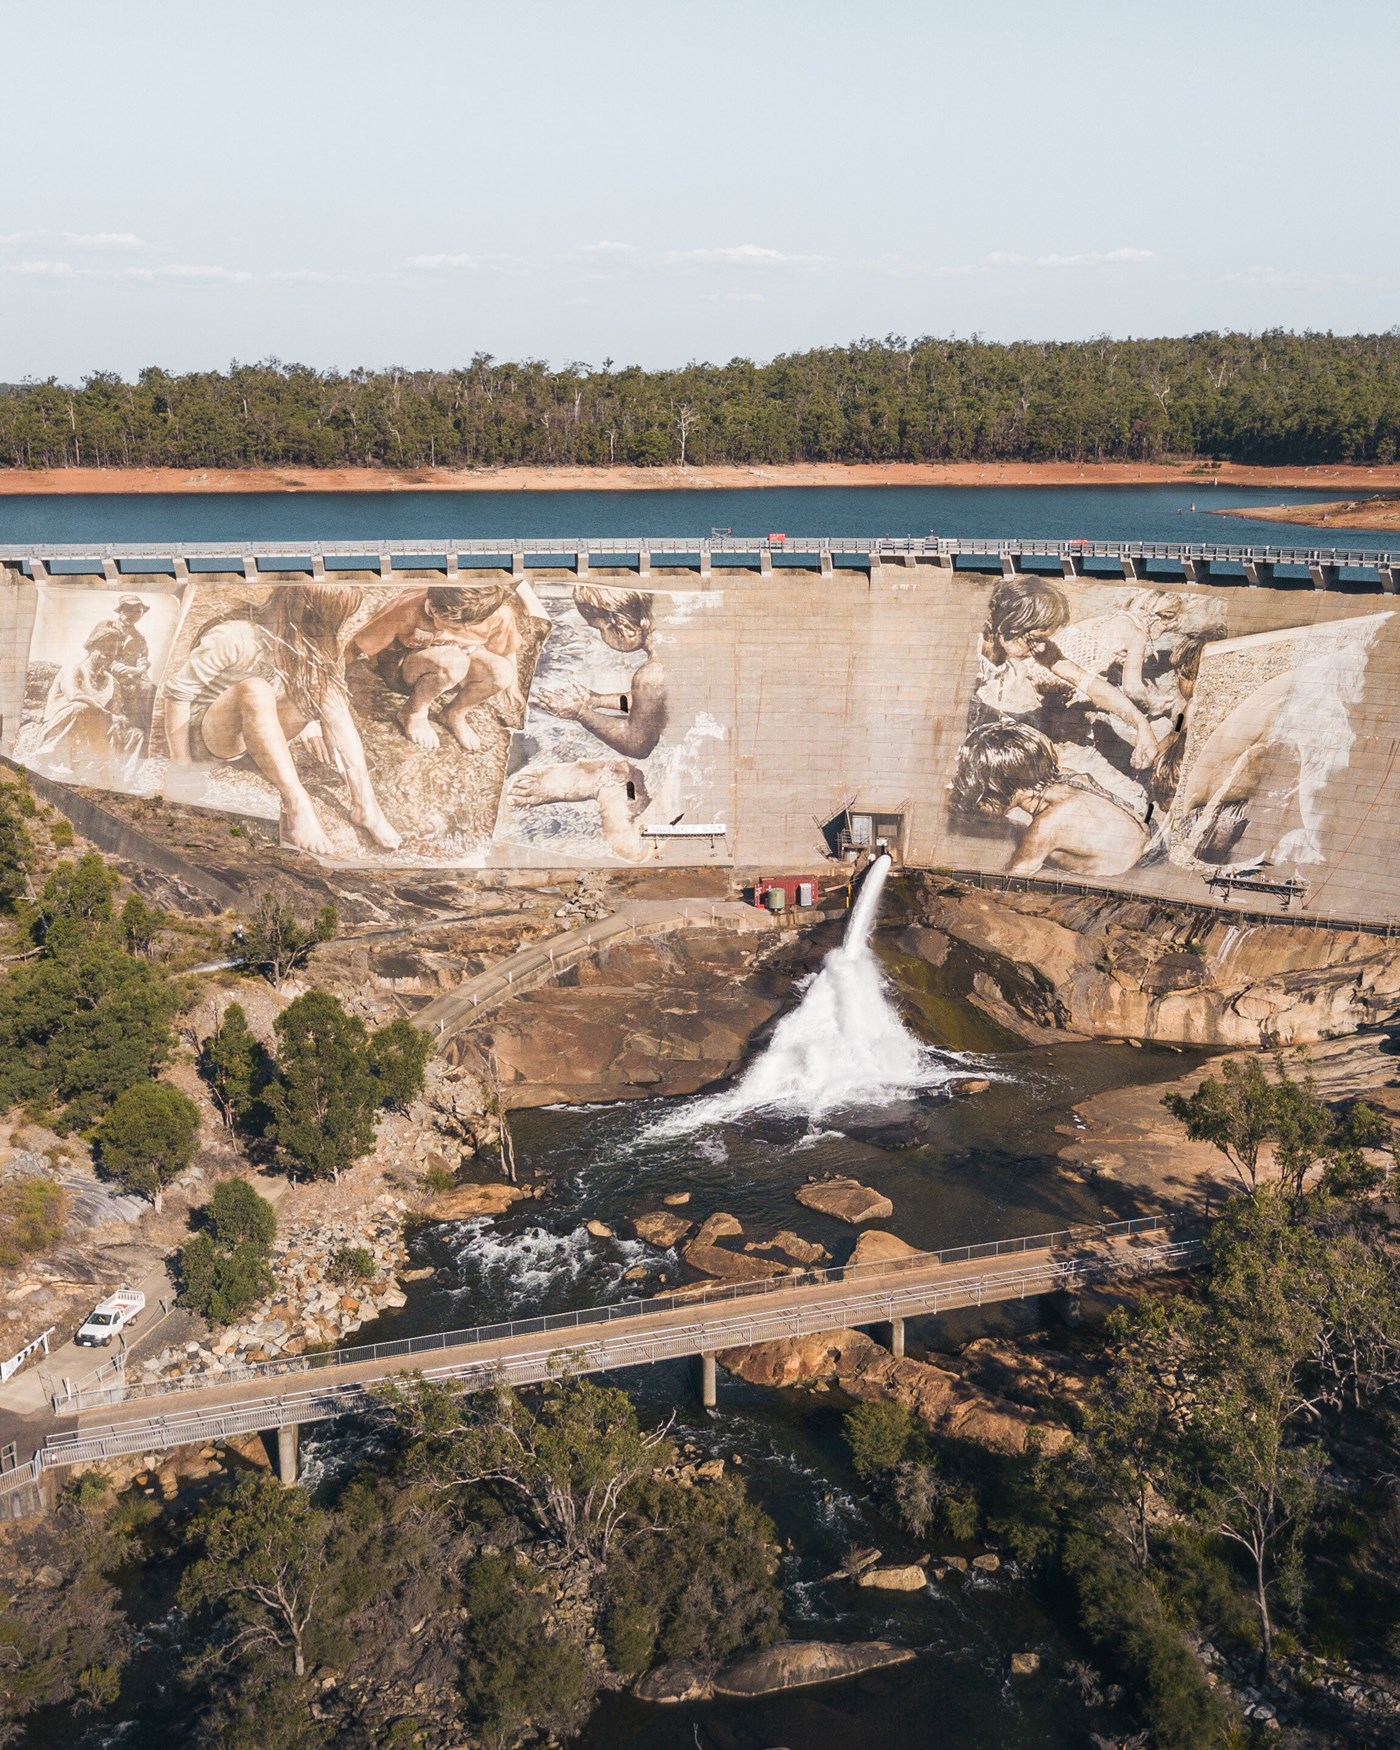 A large mural is painted on the dam walls as large amounts of water gushes out.